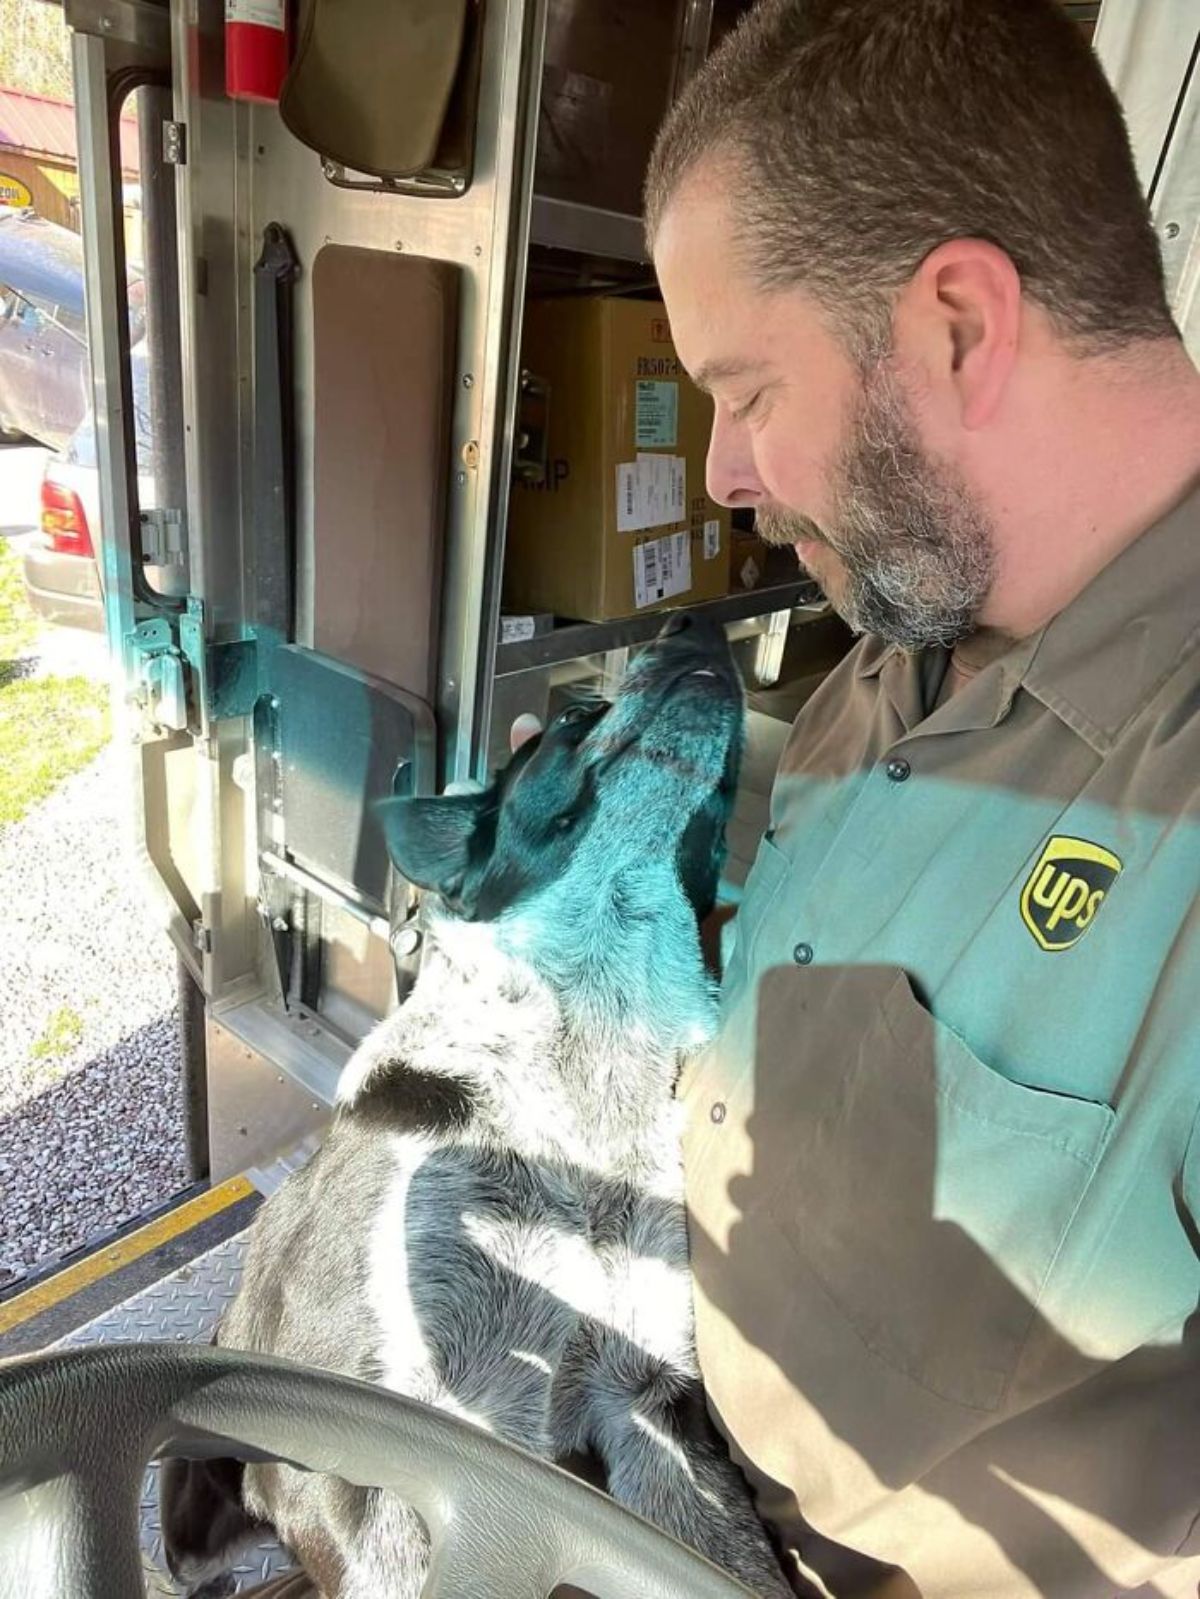 male ups driver in the truck petting a black and white dog